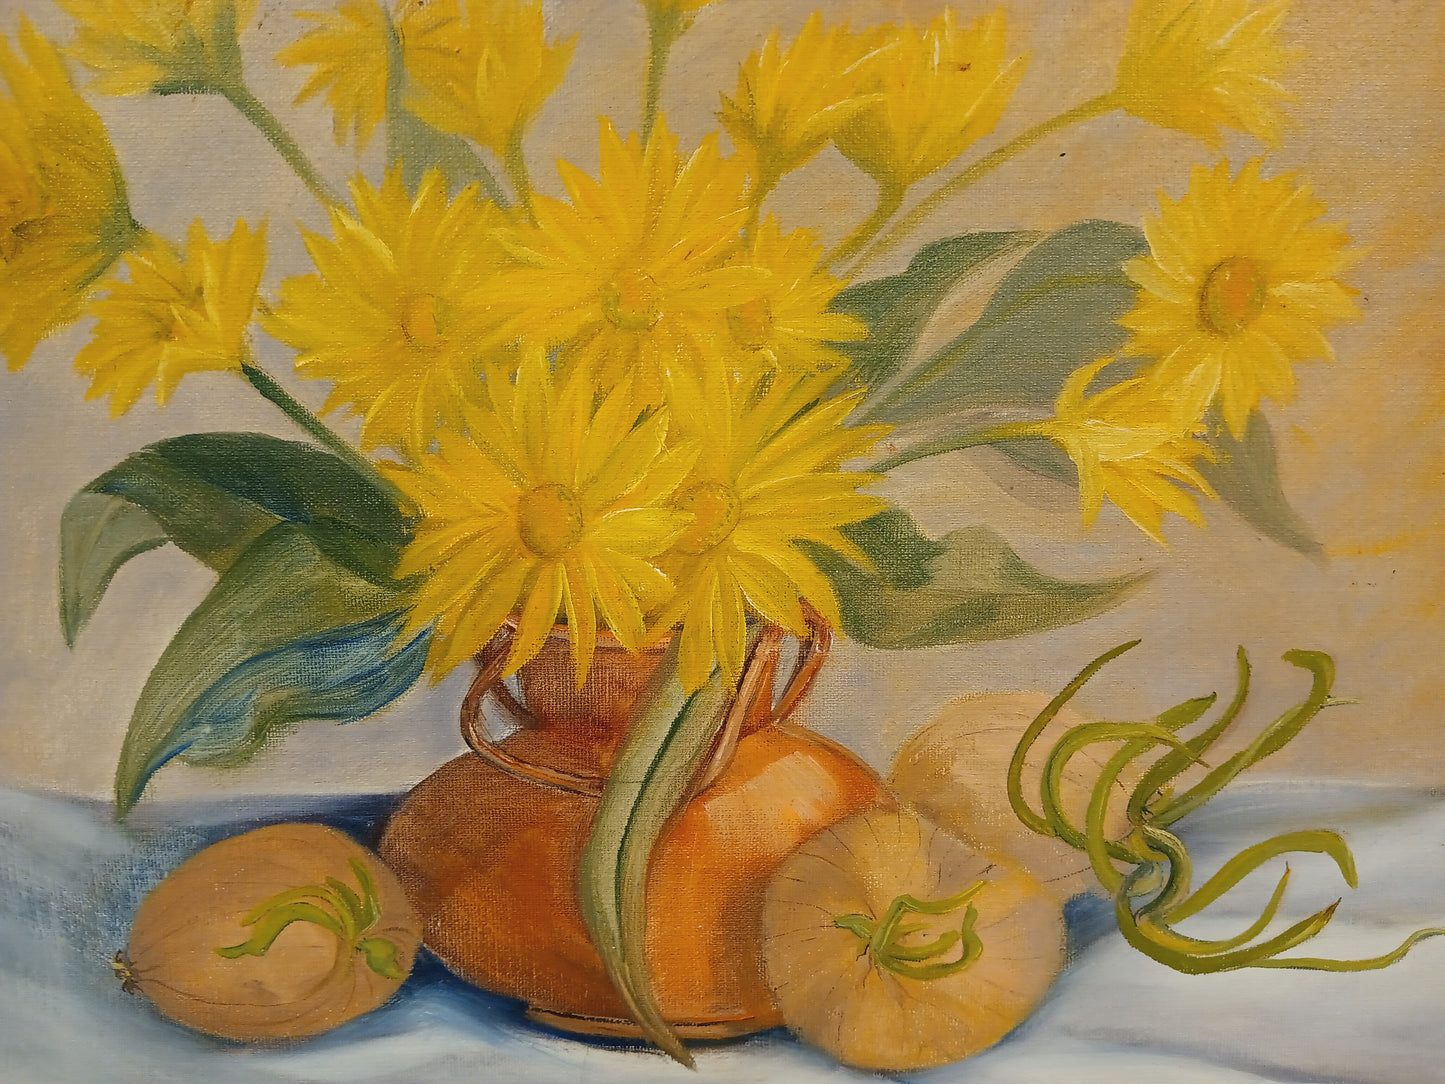 Flower and Sprouting Onion Still Life Original Painting